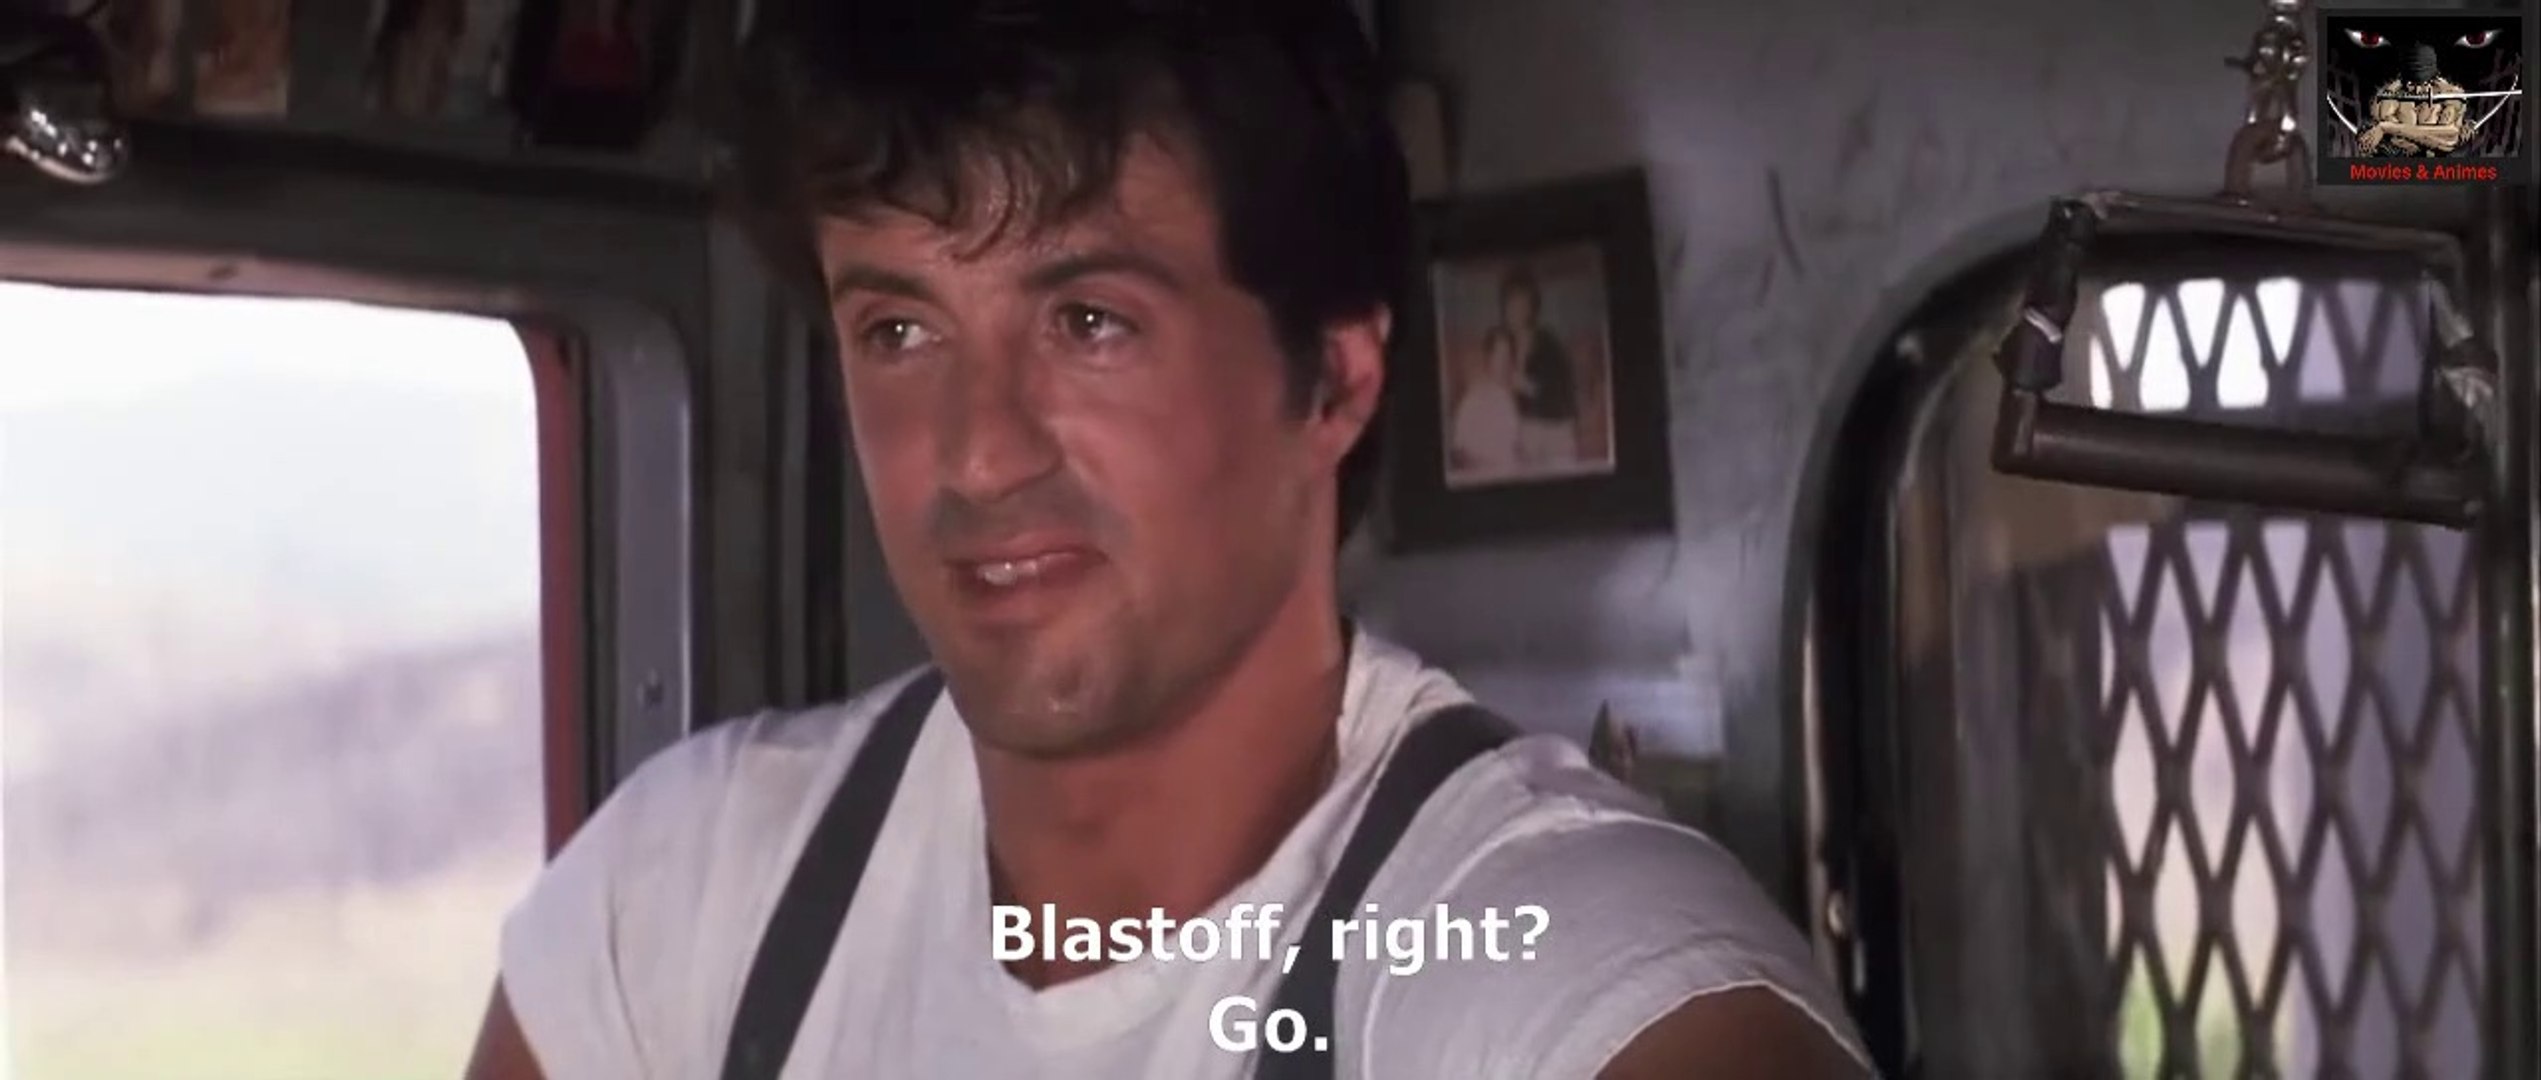 Over The Movie 1987 |Sylvester Stallone| Part (1 of 2) - فيديو Dailymotion